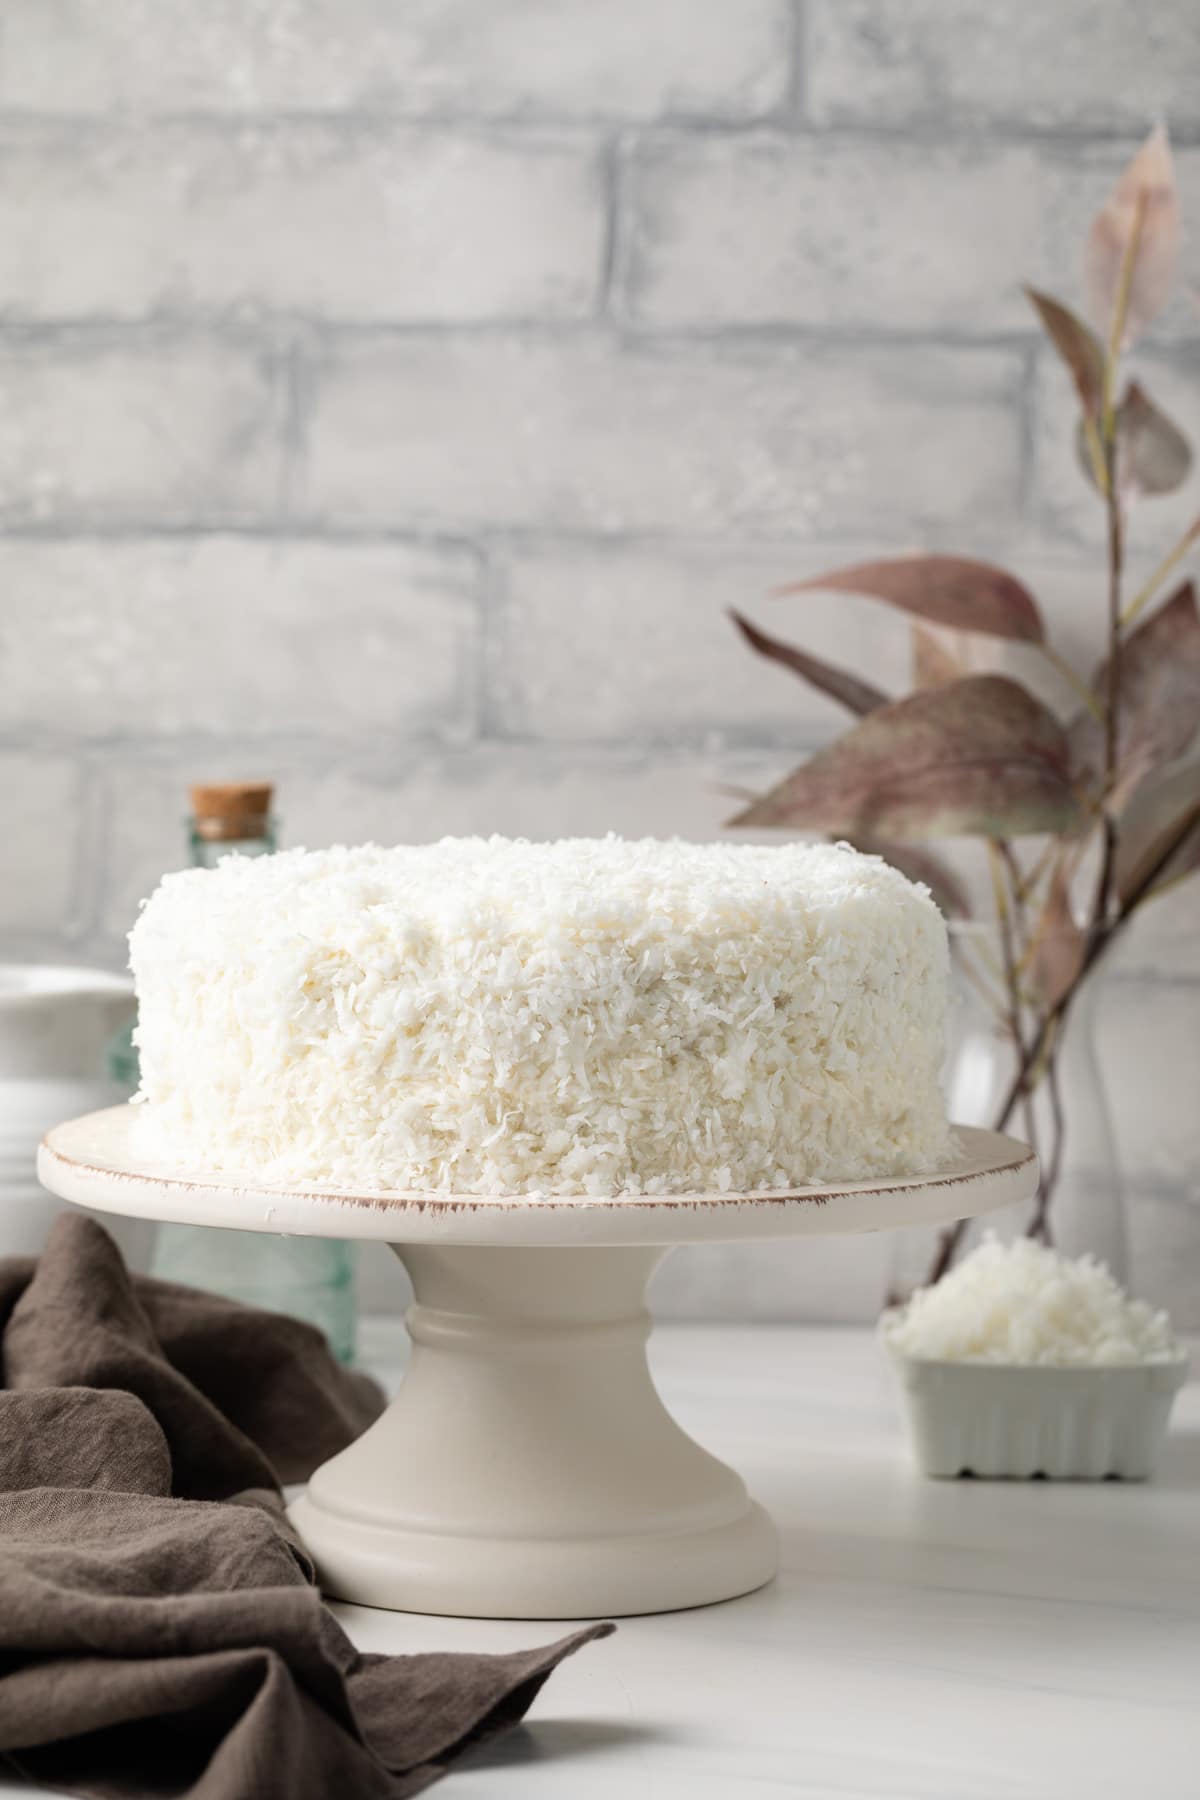 Coconut cake on a cake stand.